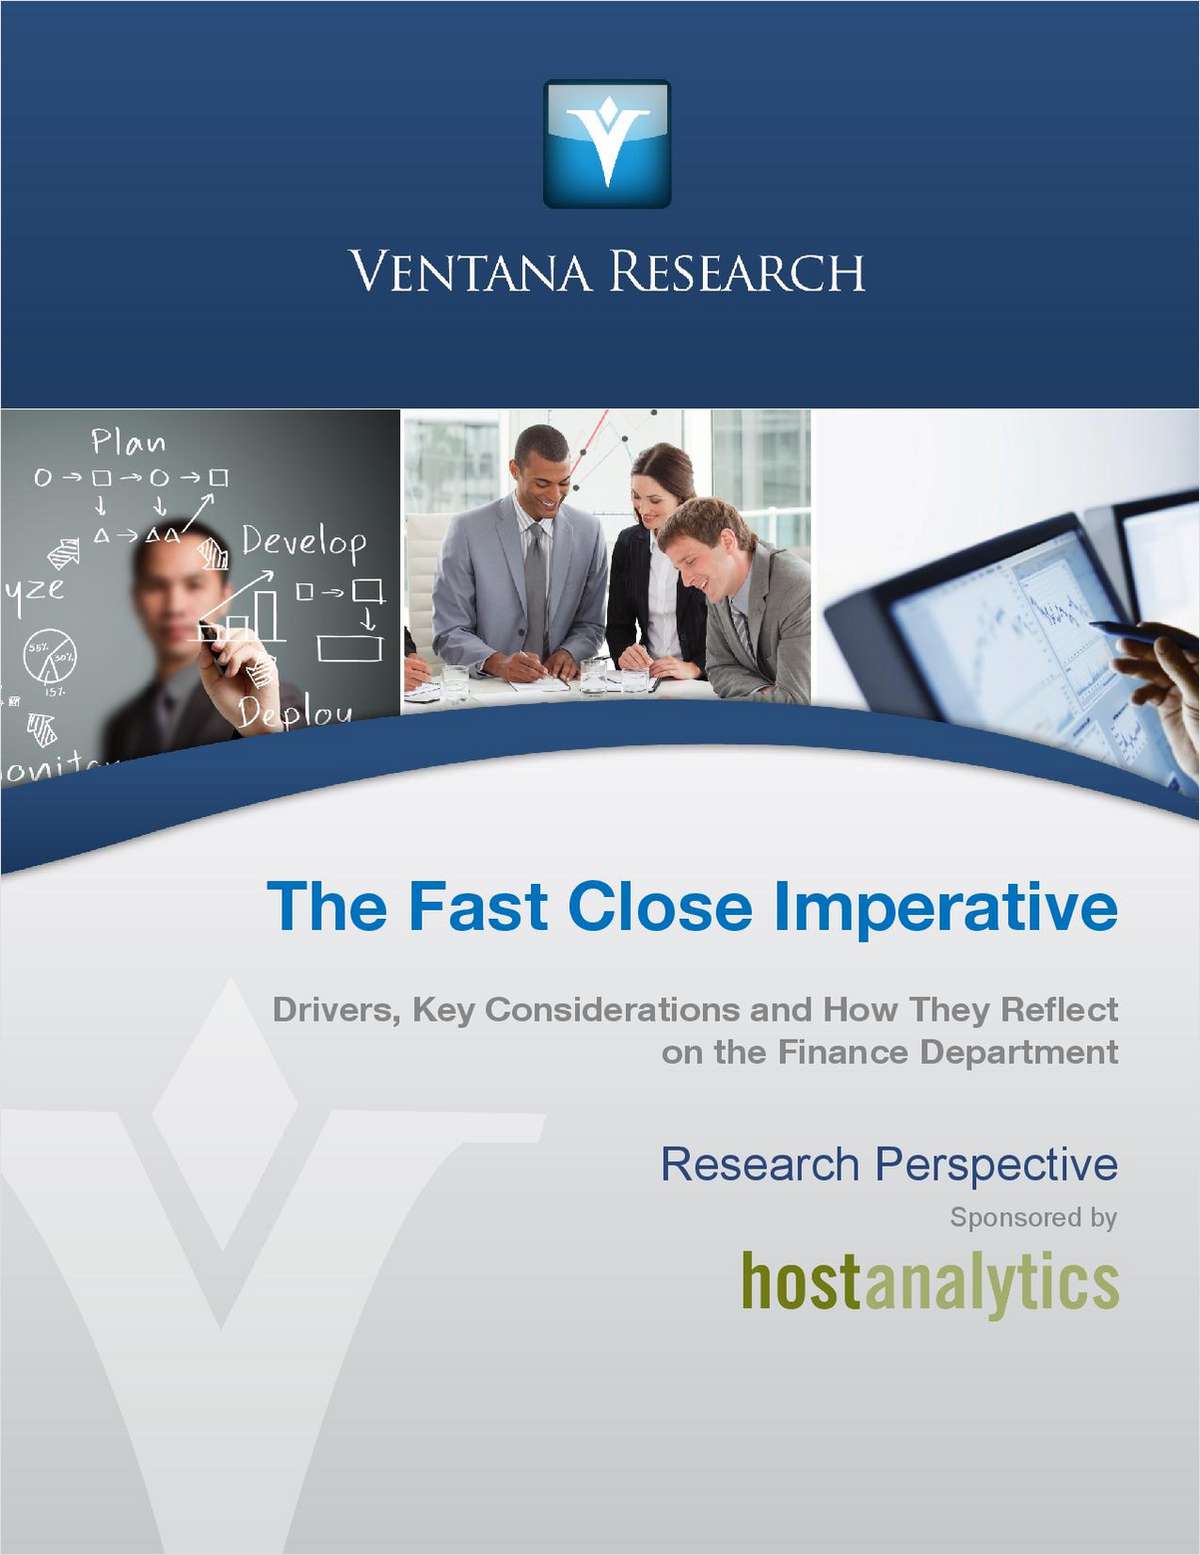 The Fast Close Imperative for Finance